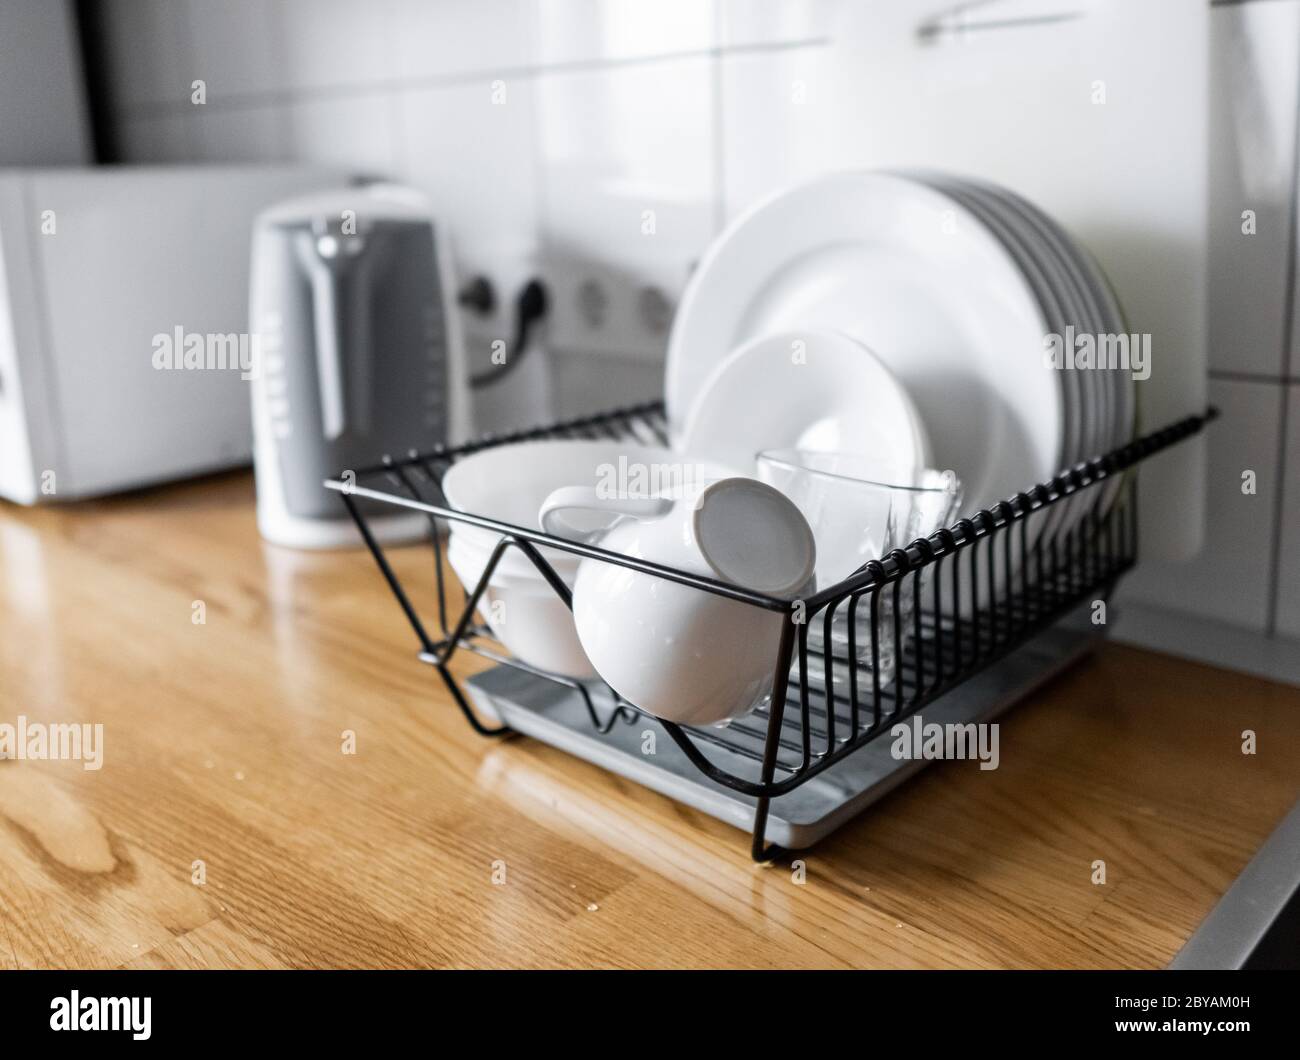 This Self-Drying, Antibacterial Dish Rack System Keeps Counters